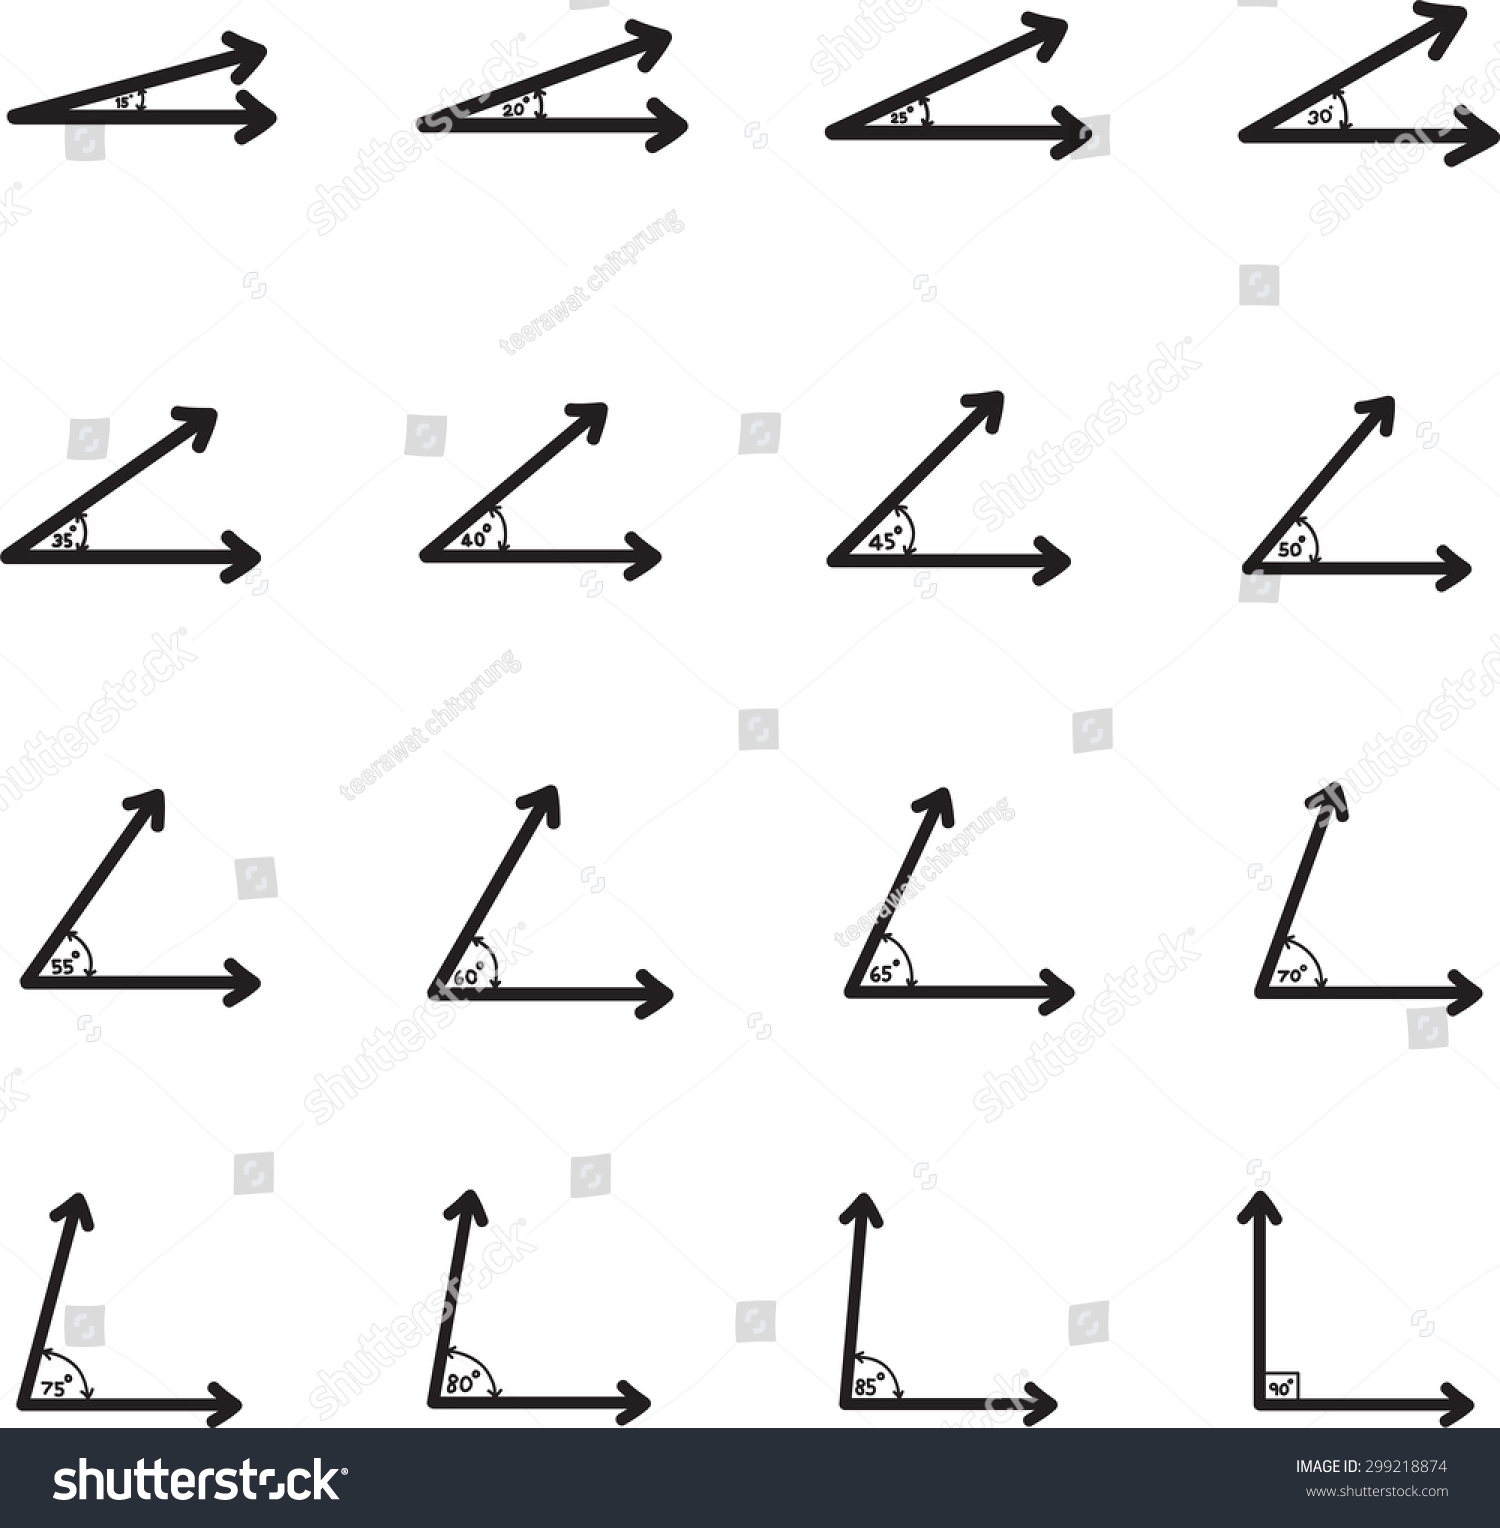 Vector Angle 15-90 Degrees, Geometry Math Signs Symbols - 299218874 ...